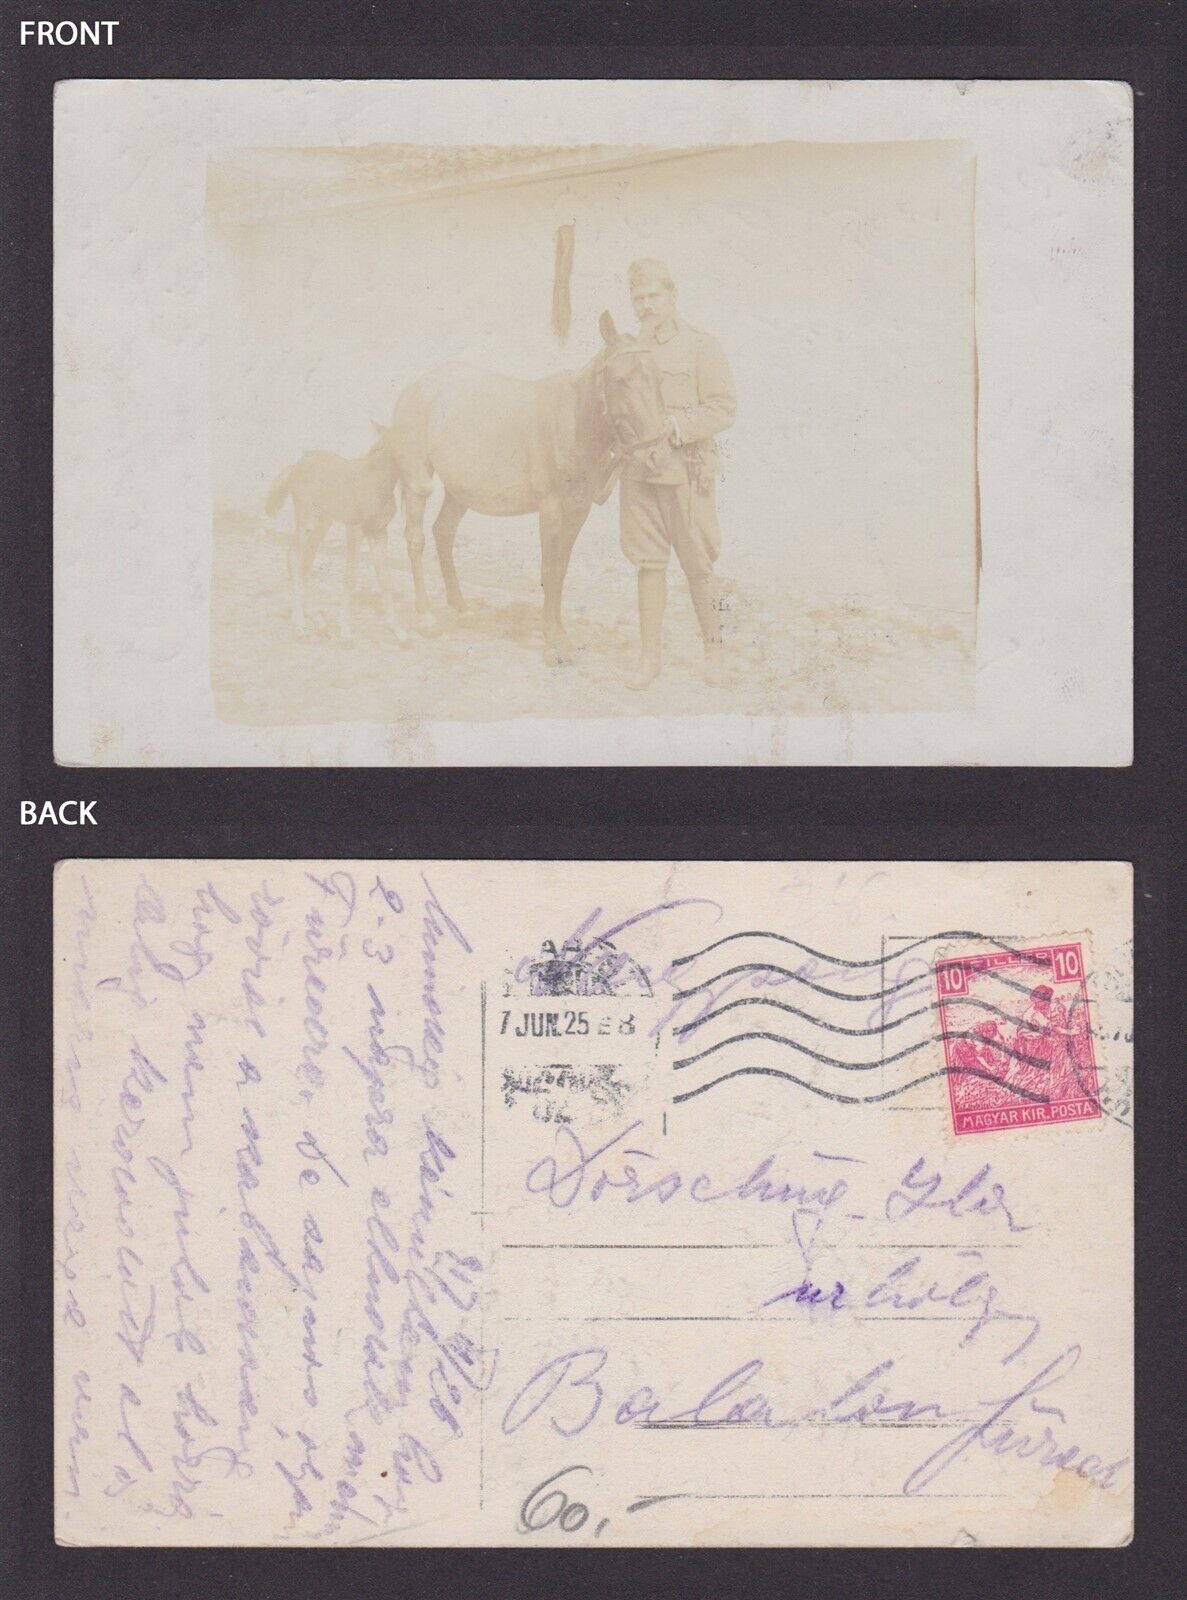 HUNGARY, Vintage postcard, RPPC, The soldier with horse and foal, Posted